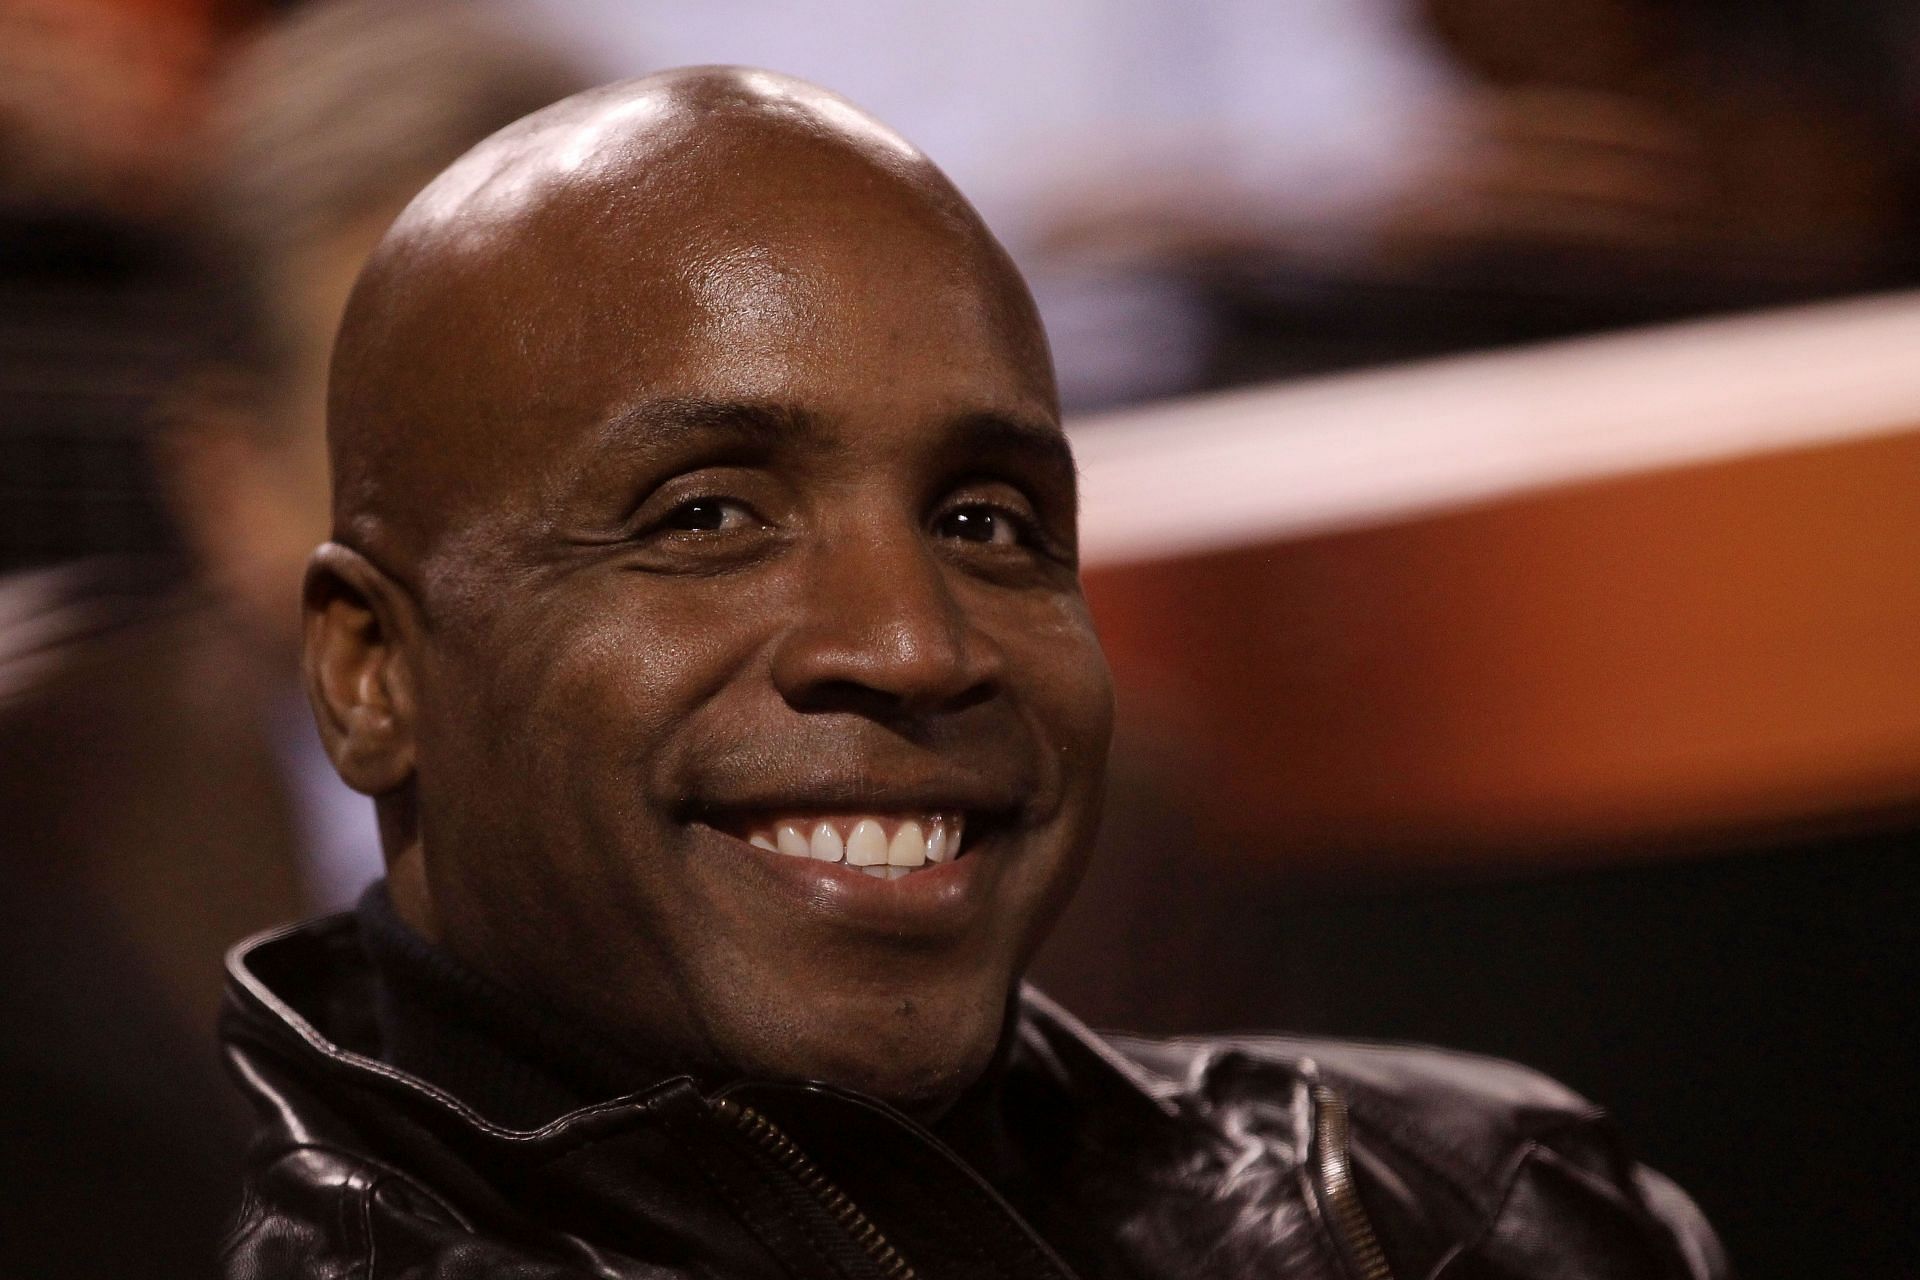 When Barry Bonds ex-girlfriend Kimberly Bell compared his selfish exploits in bed to his self-centered baseball career photo